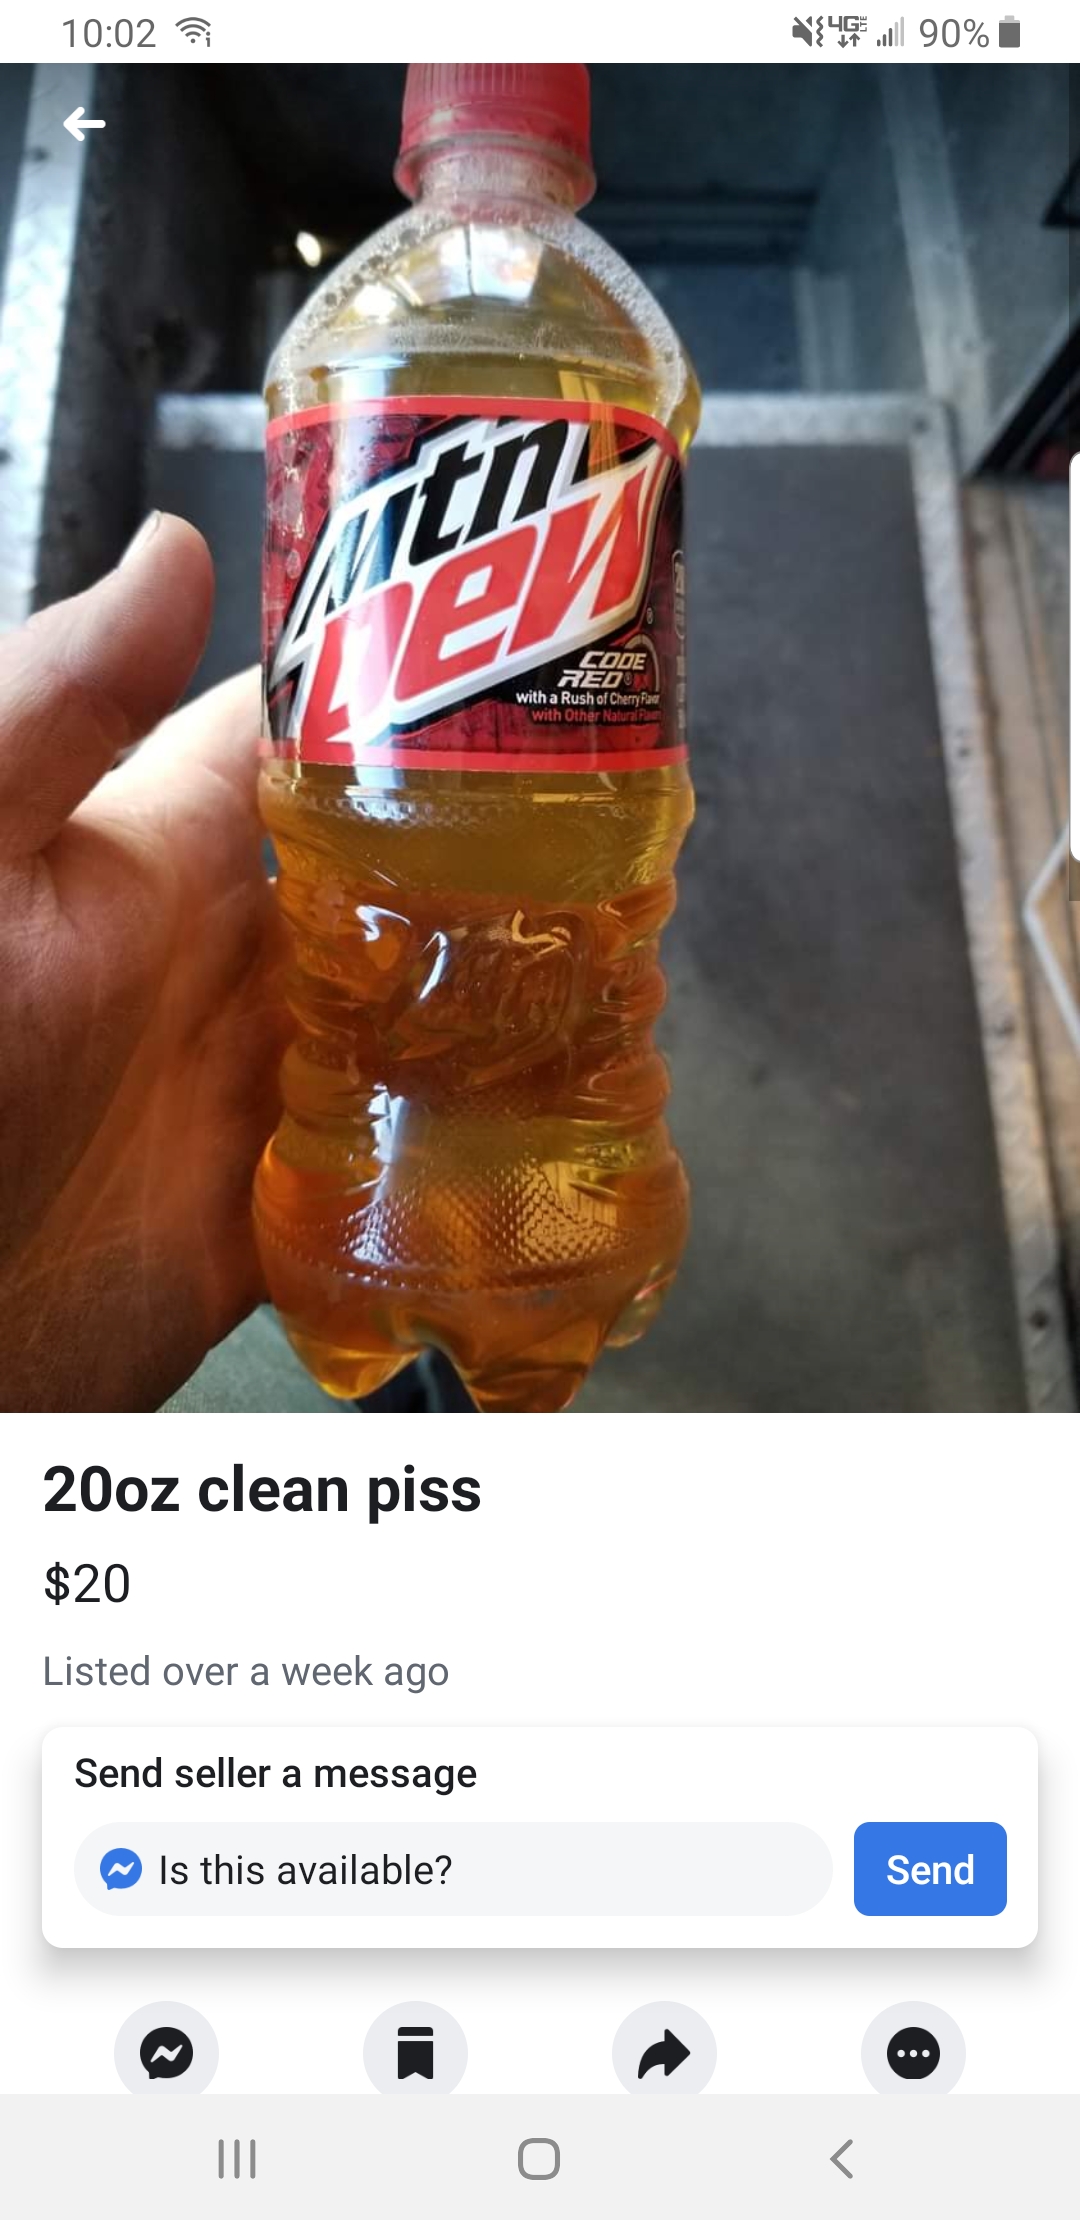 mountain dew - 90% 20oz clean piss $20 Listed over a week ago Send seller a message Is this available? Send